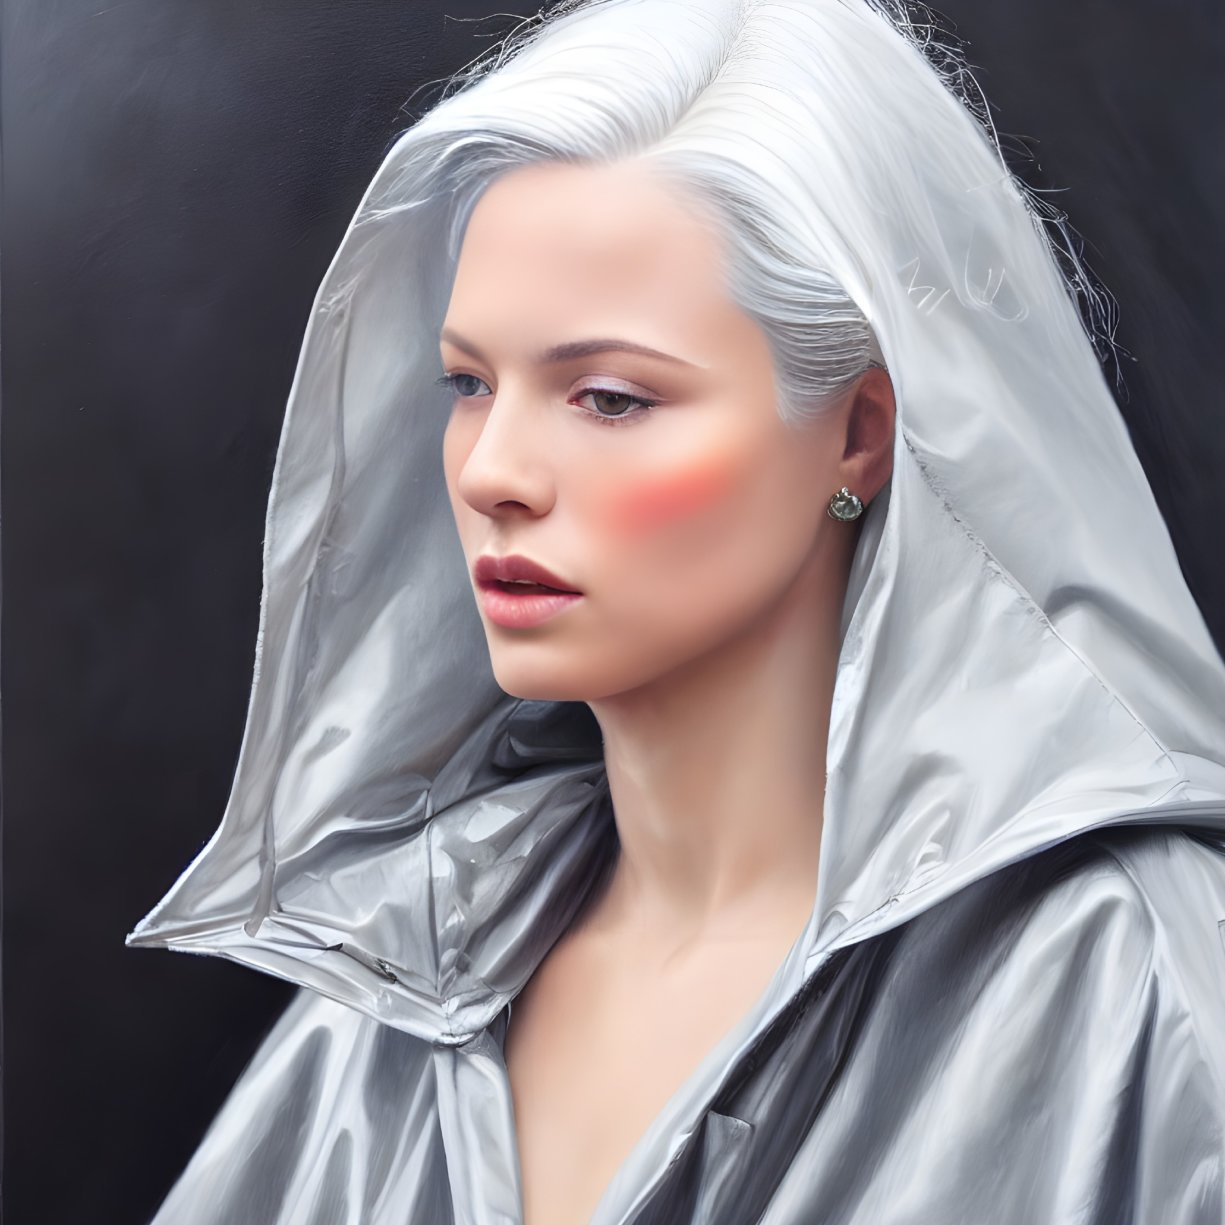 Silver-white Haired Woman in Metallic Hood with Fair Complexion and Pink Blush